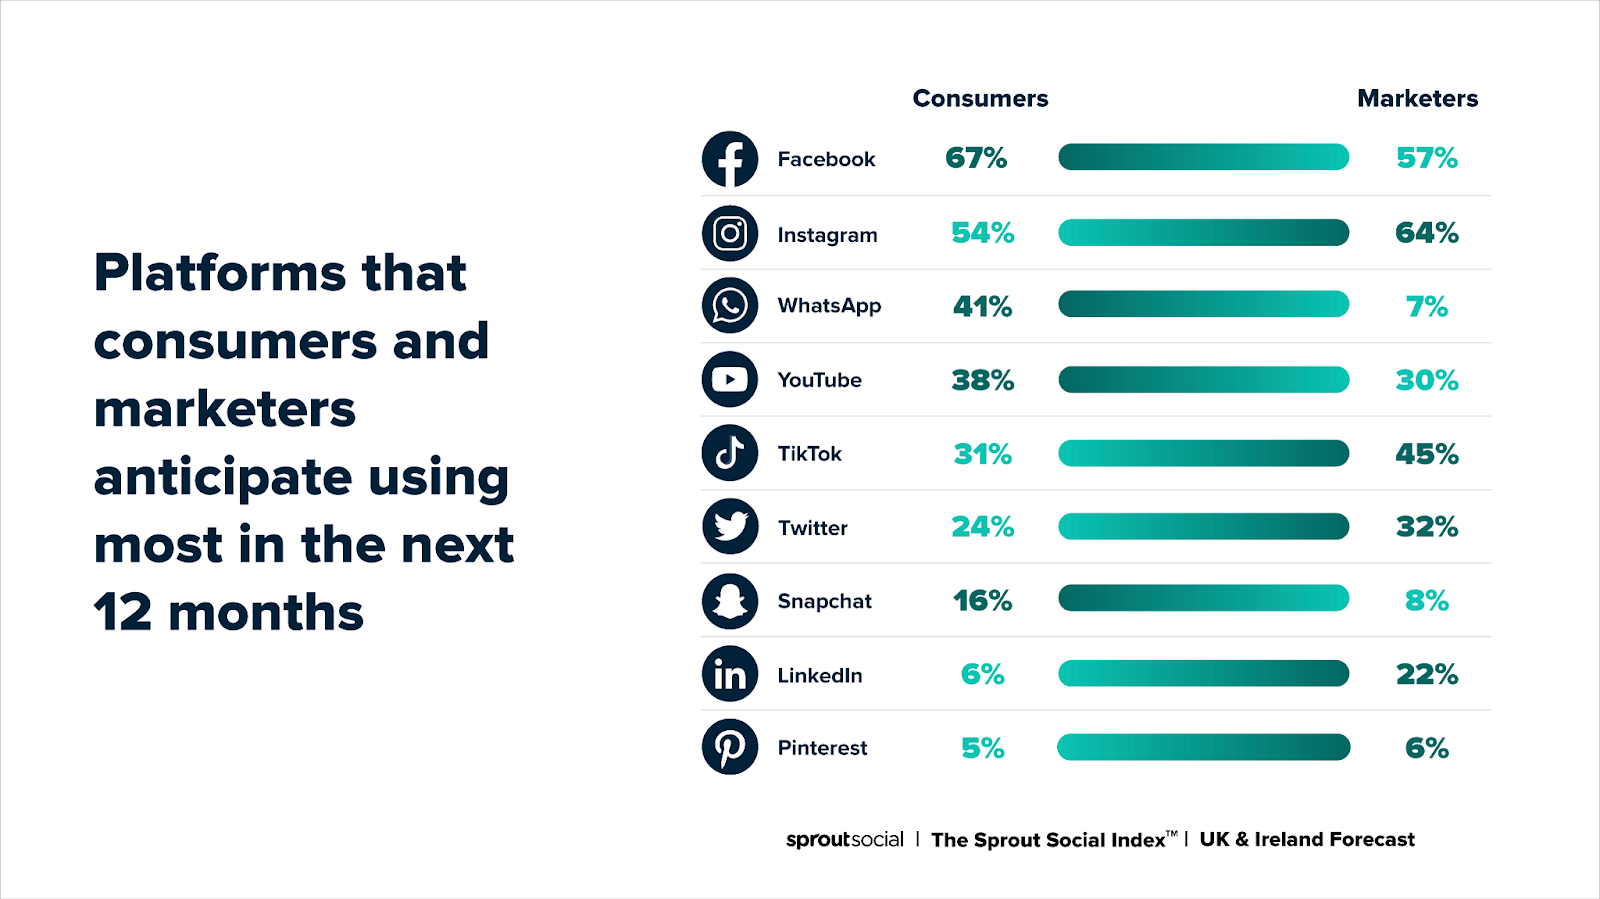 platforms consumers and marketers anticipate using in next 12 months